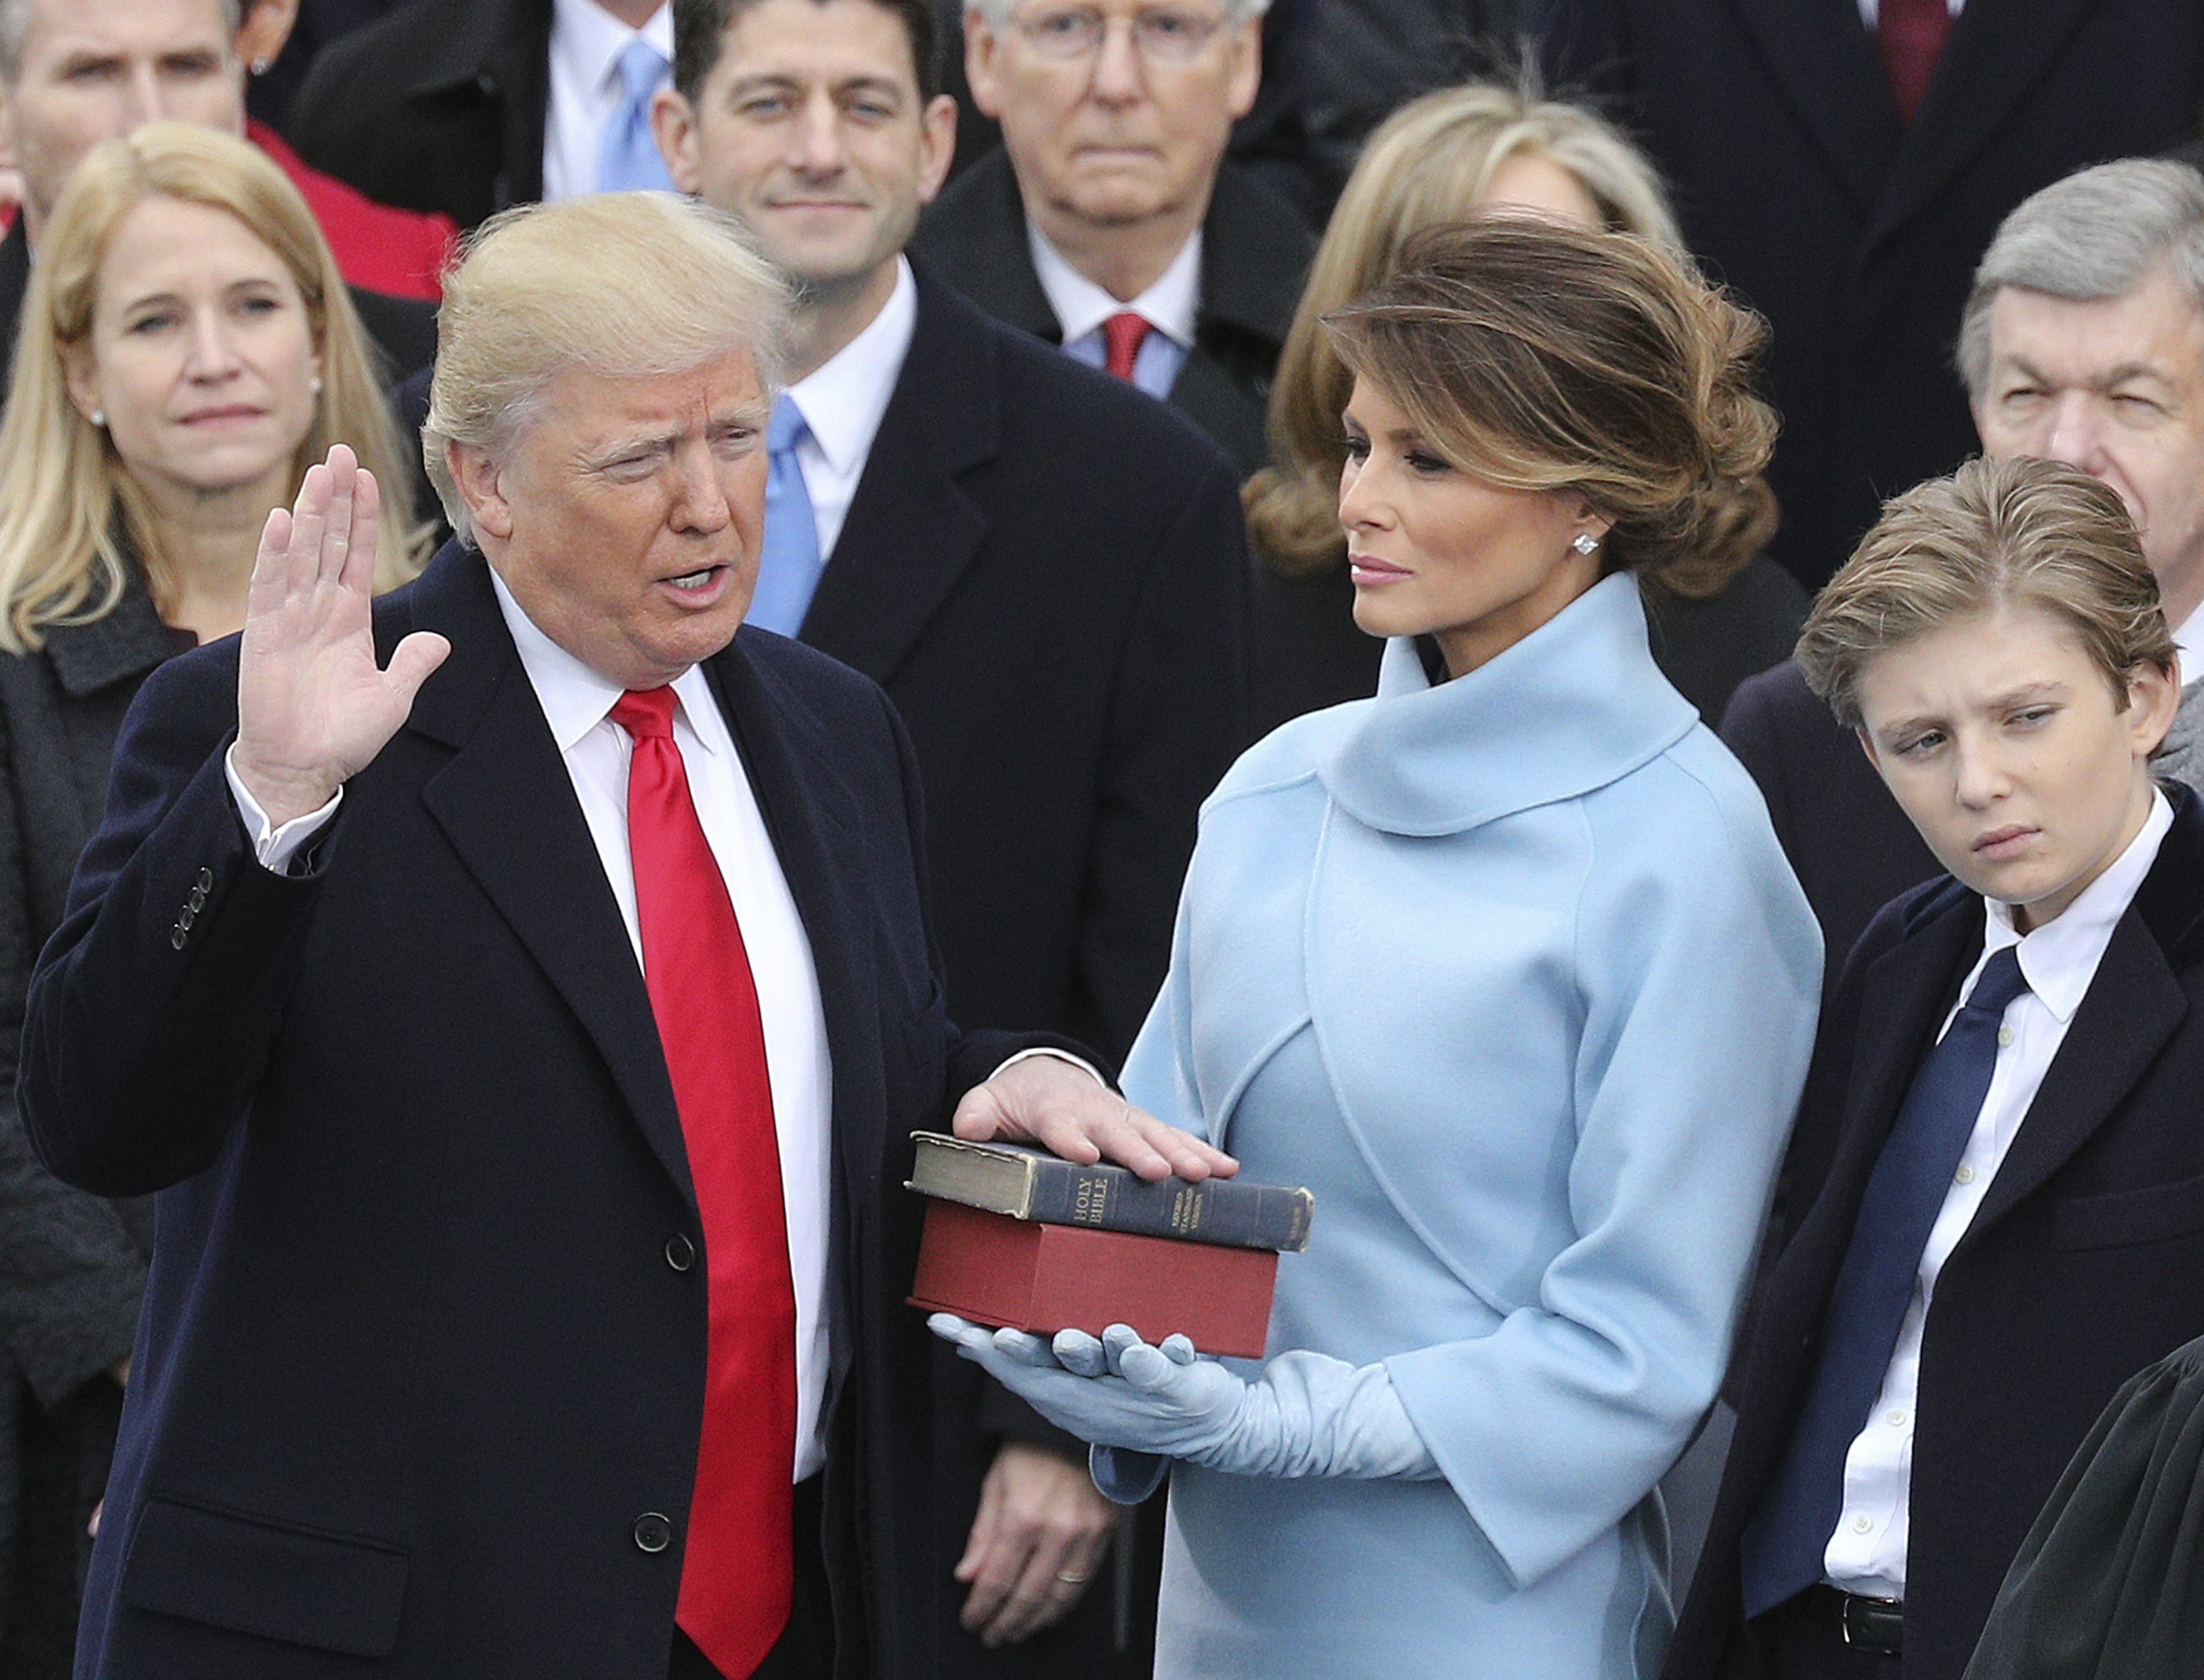 (Flickr: Andres Castellano) Donald Trump takes the Presidential Oath of Office.